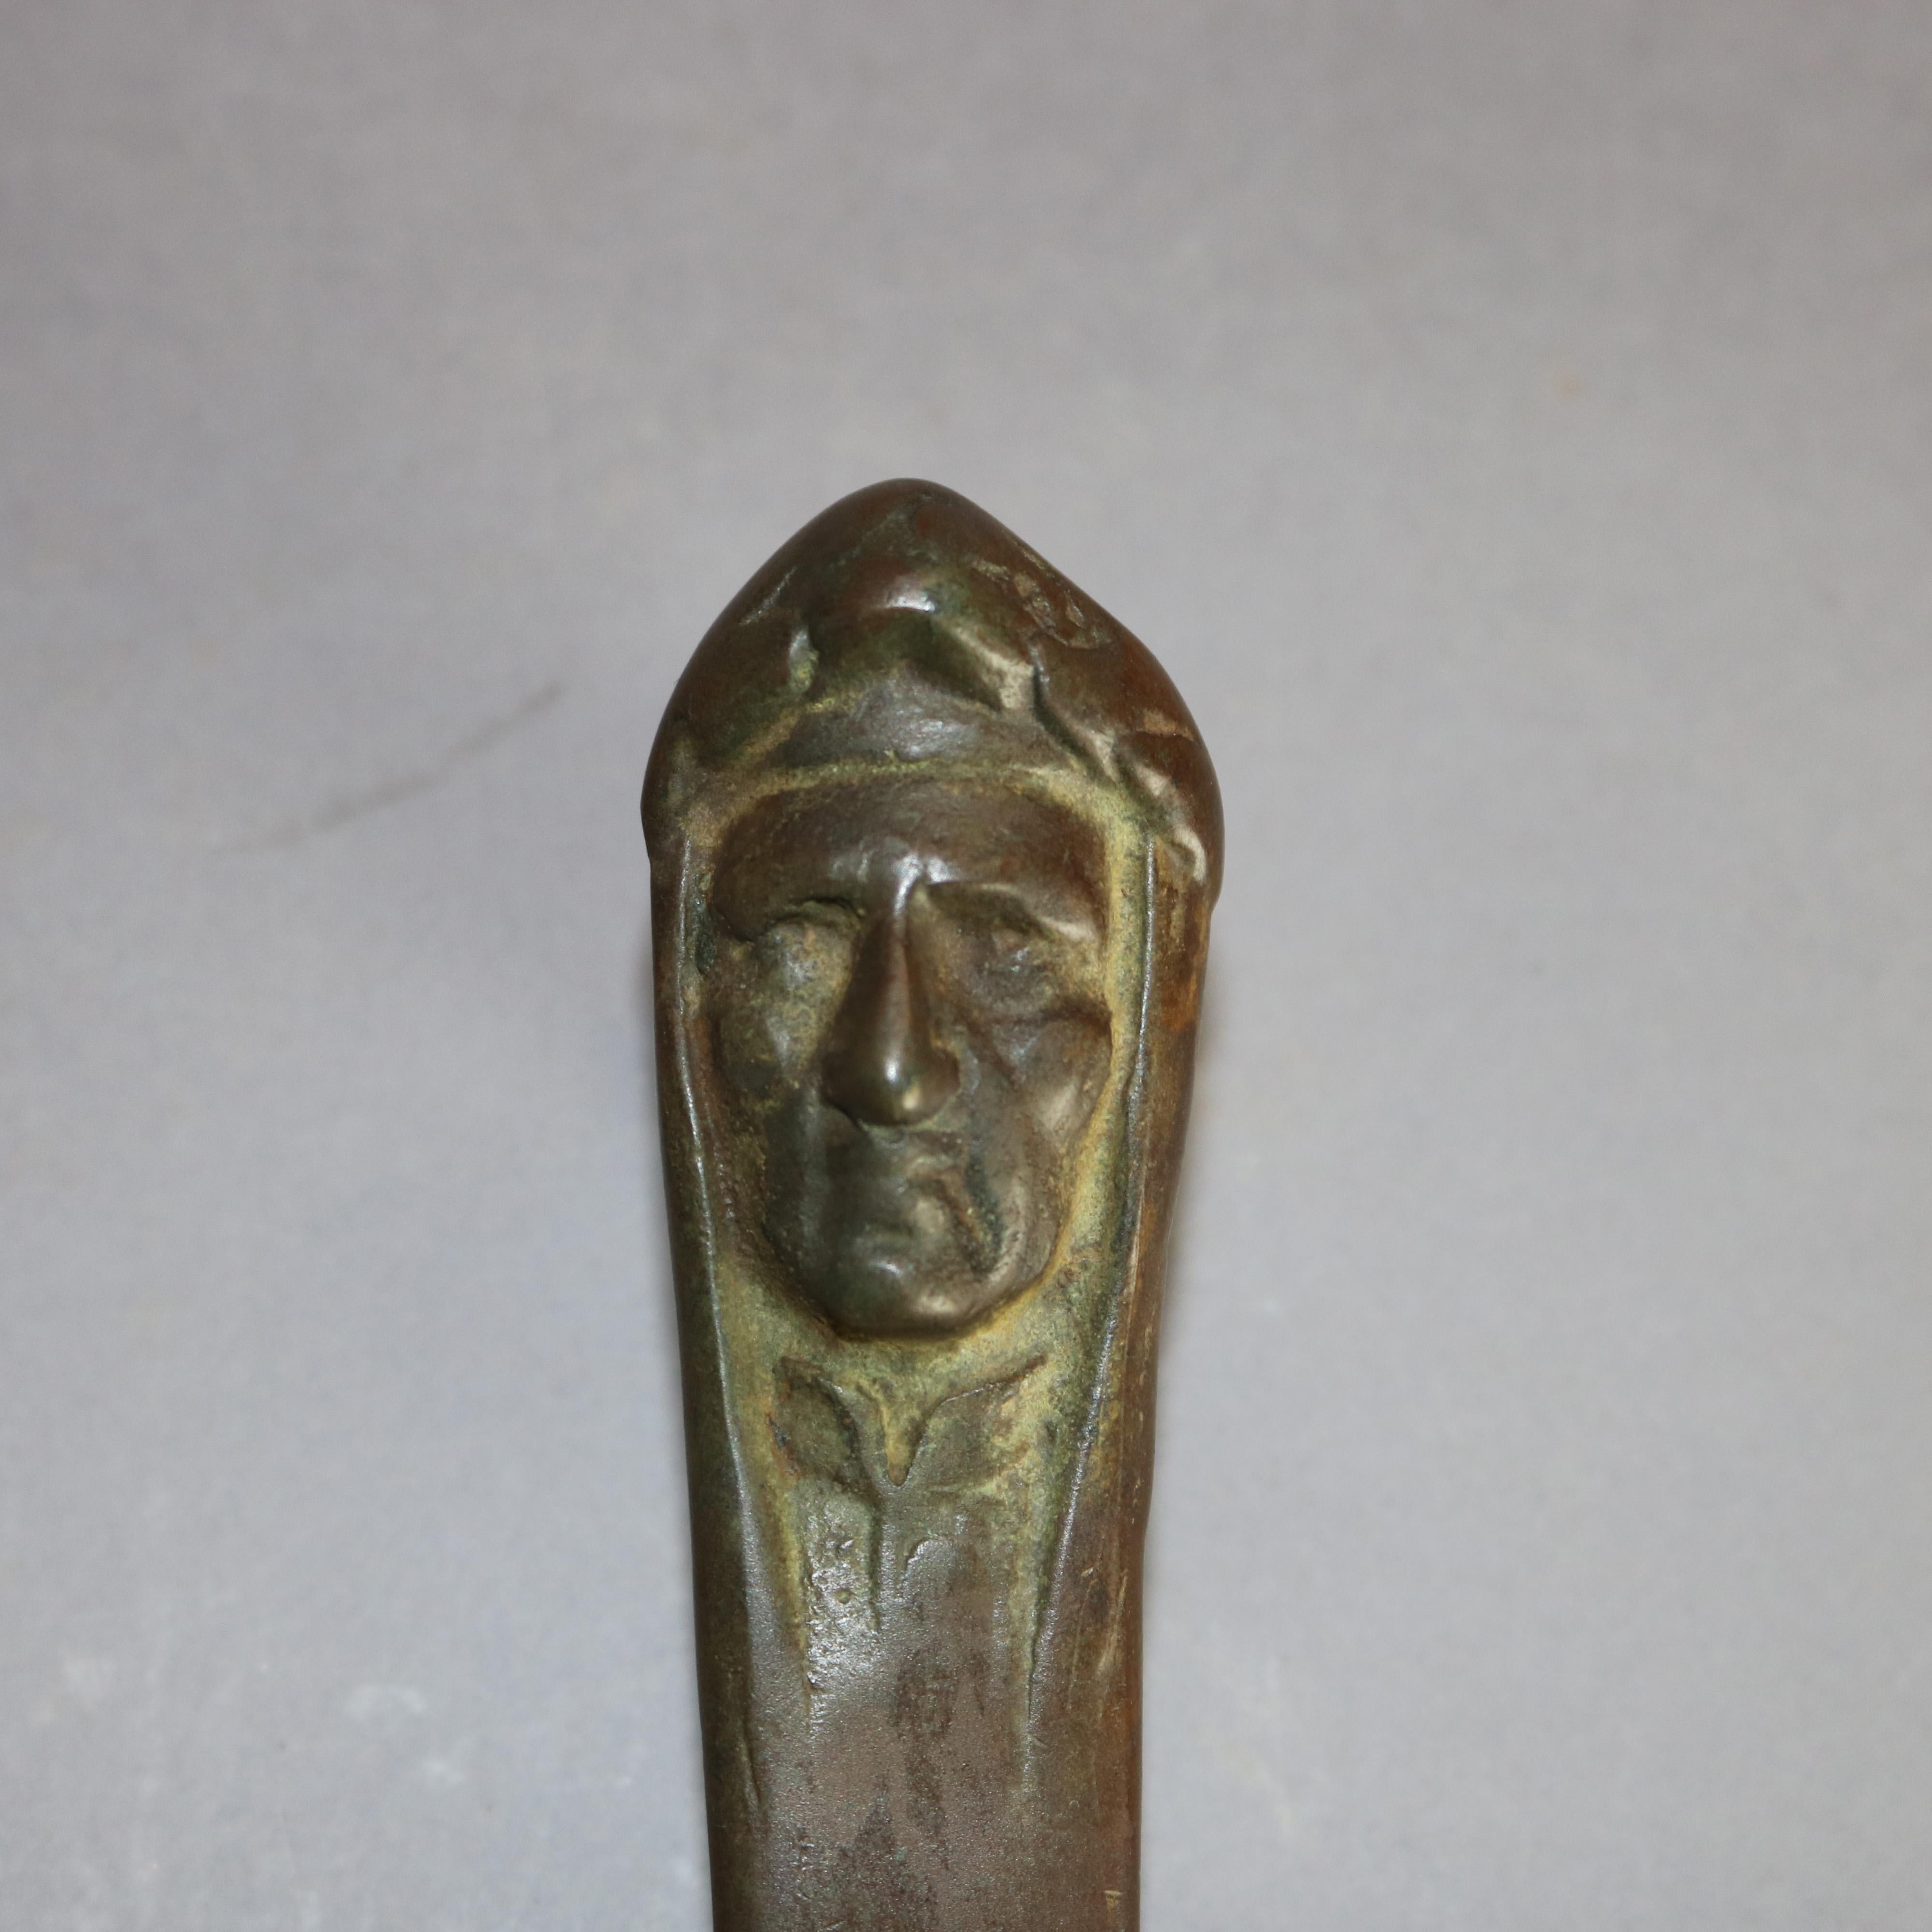 An antique letter figural letter opener in the manner Tiffany & Co. offers cast bronze construction with face mask of Italian poet Dante Alighieri, en verso later stamped as photographed, 20th century.

This item has not been authenticated and can